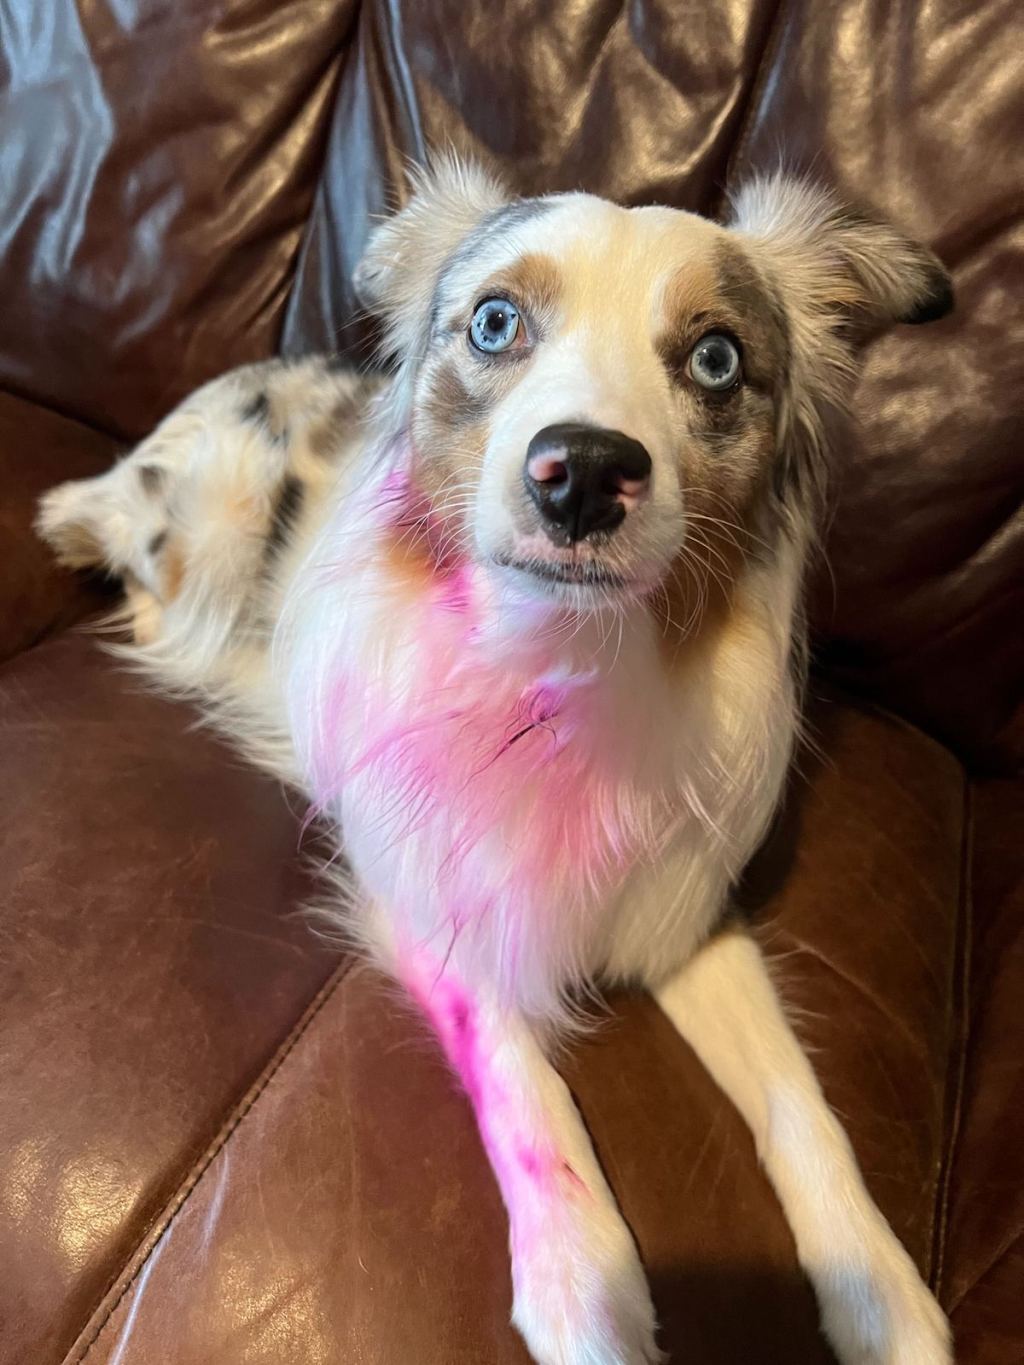 dog with bright blue eyes sitting on leather couch with pink ink on fur